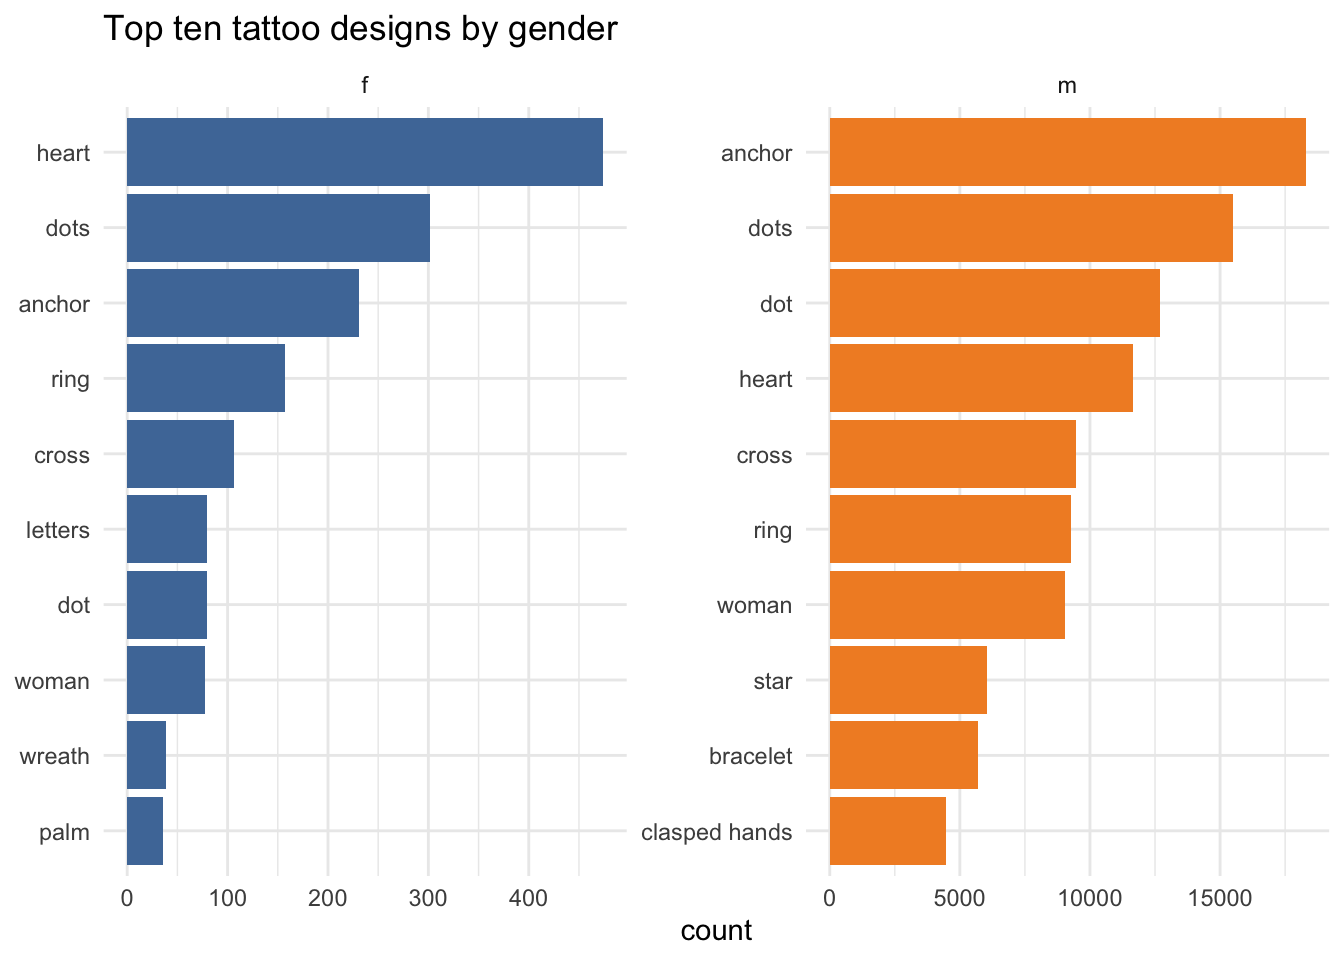 Horizontal bar charts comparing the most popular tattoo designs for men and women. The top design for men is "anchor" and "heart" for women.